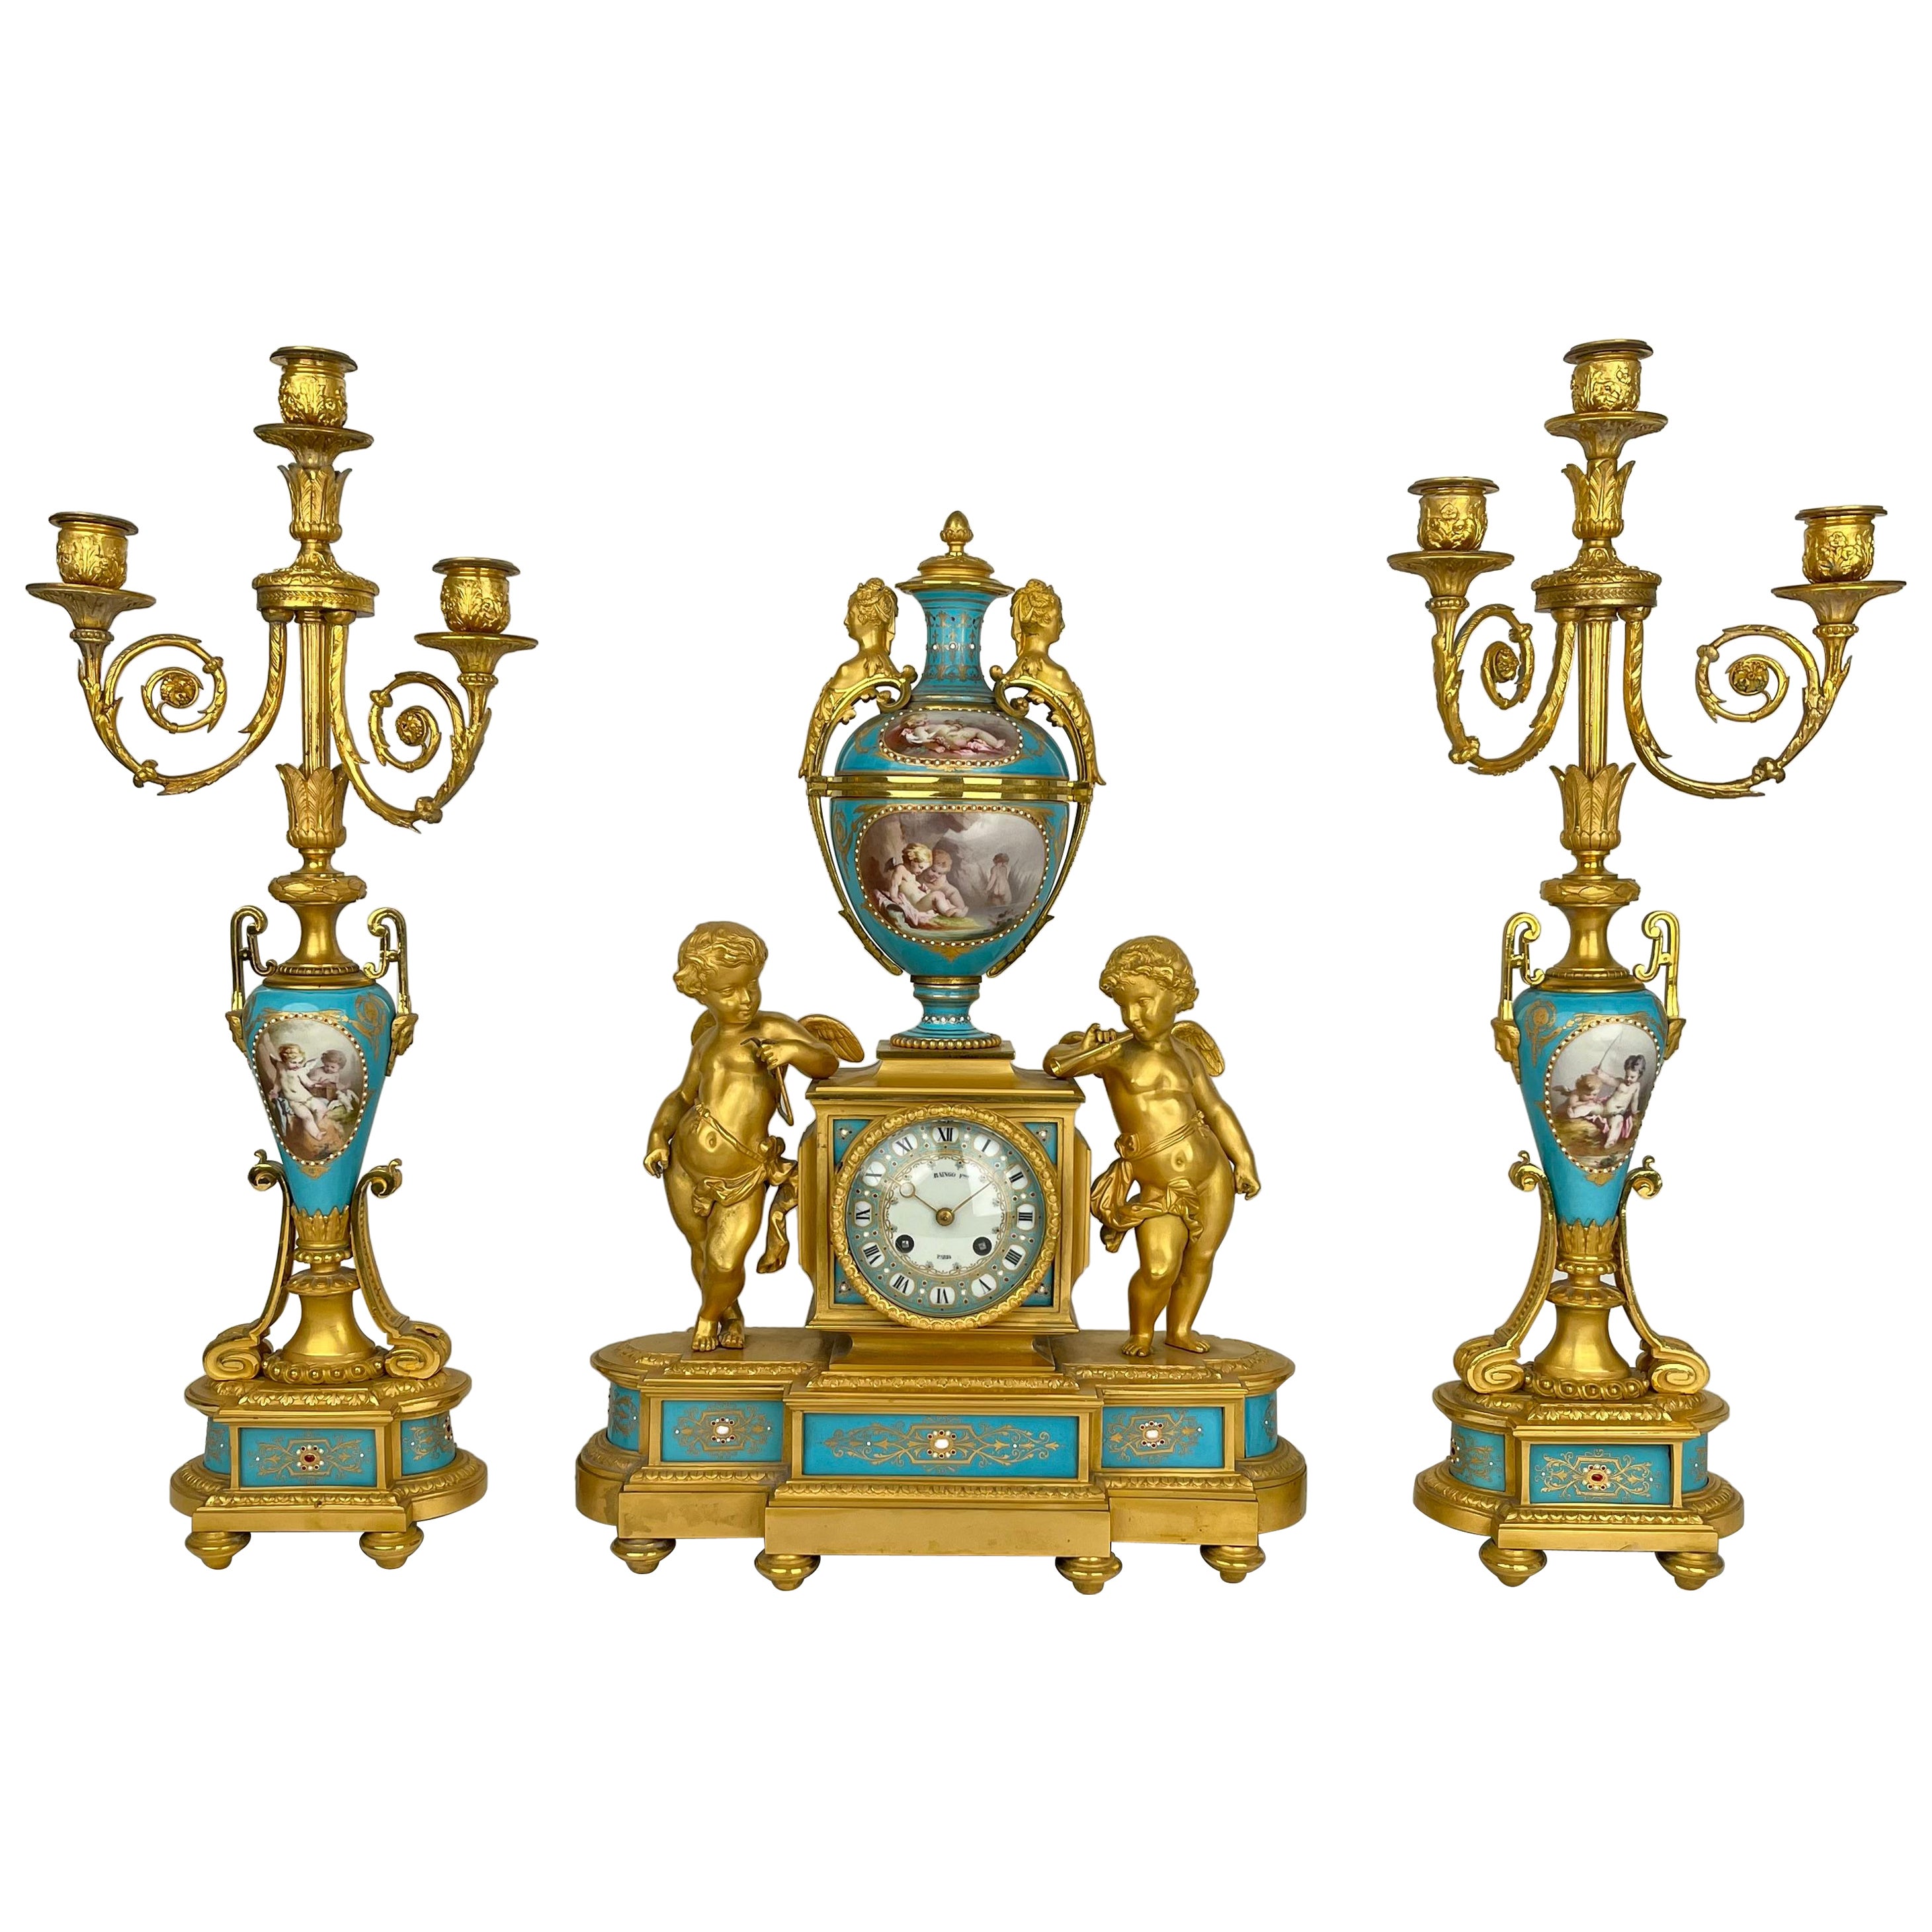 An Ormolu-Mounted Sevres Style Porcelain 'JEWELED' Turquoise-Ground Clock Set For Sale